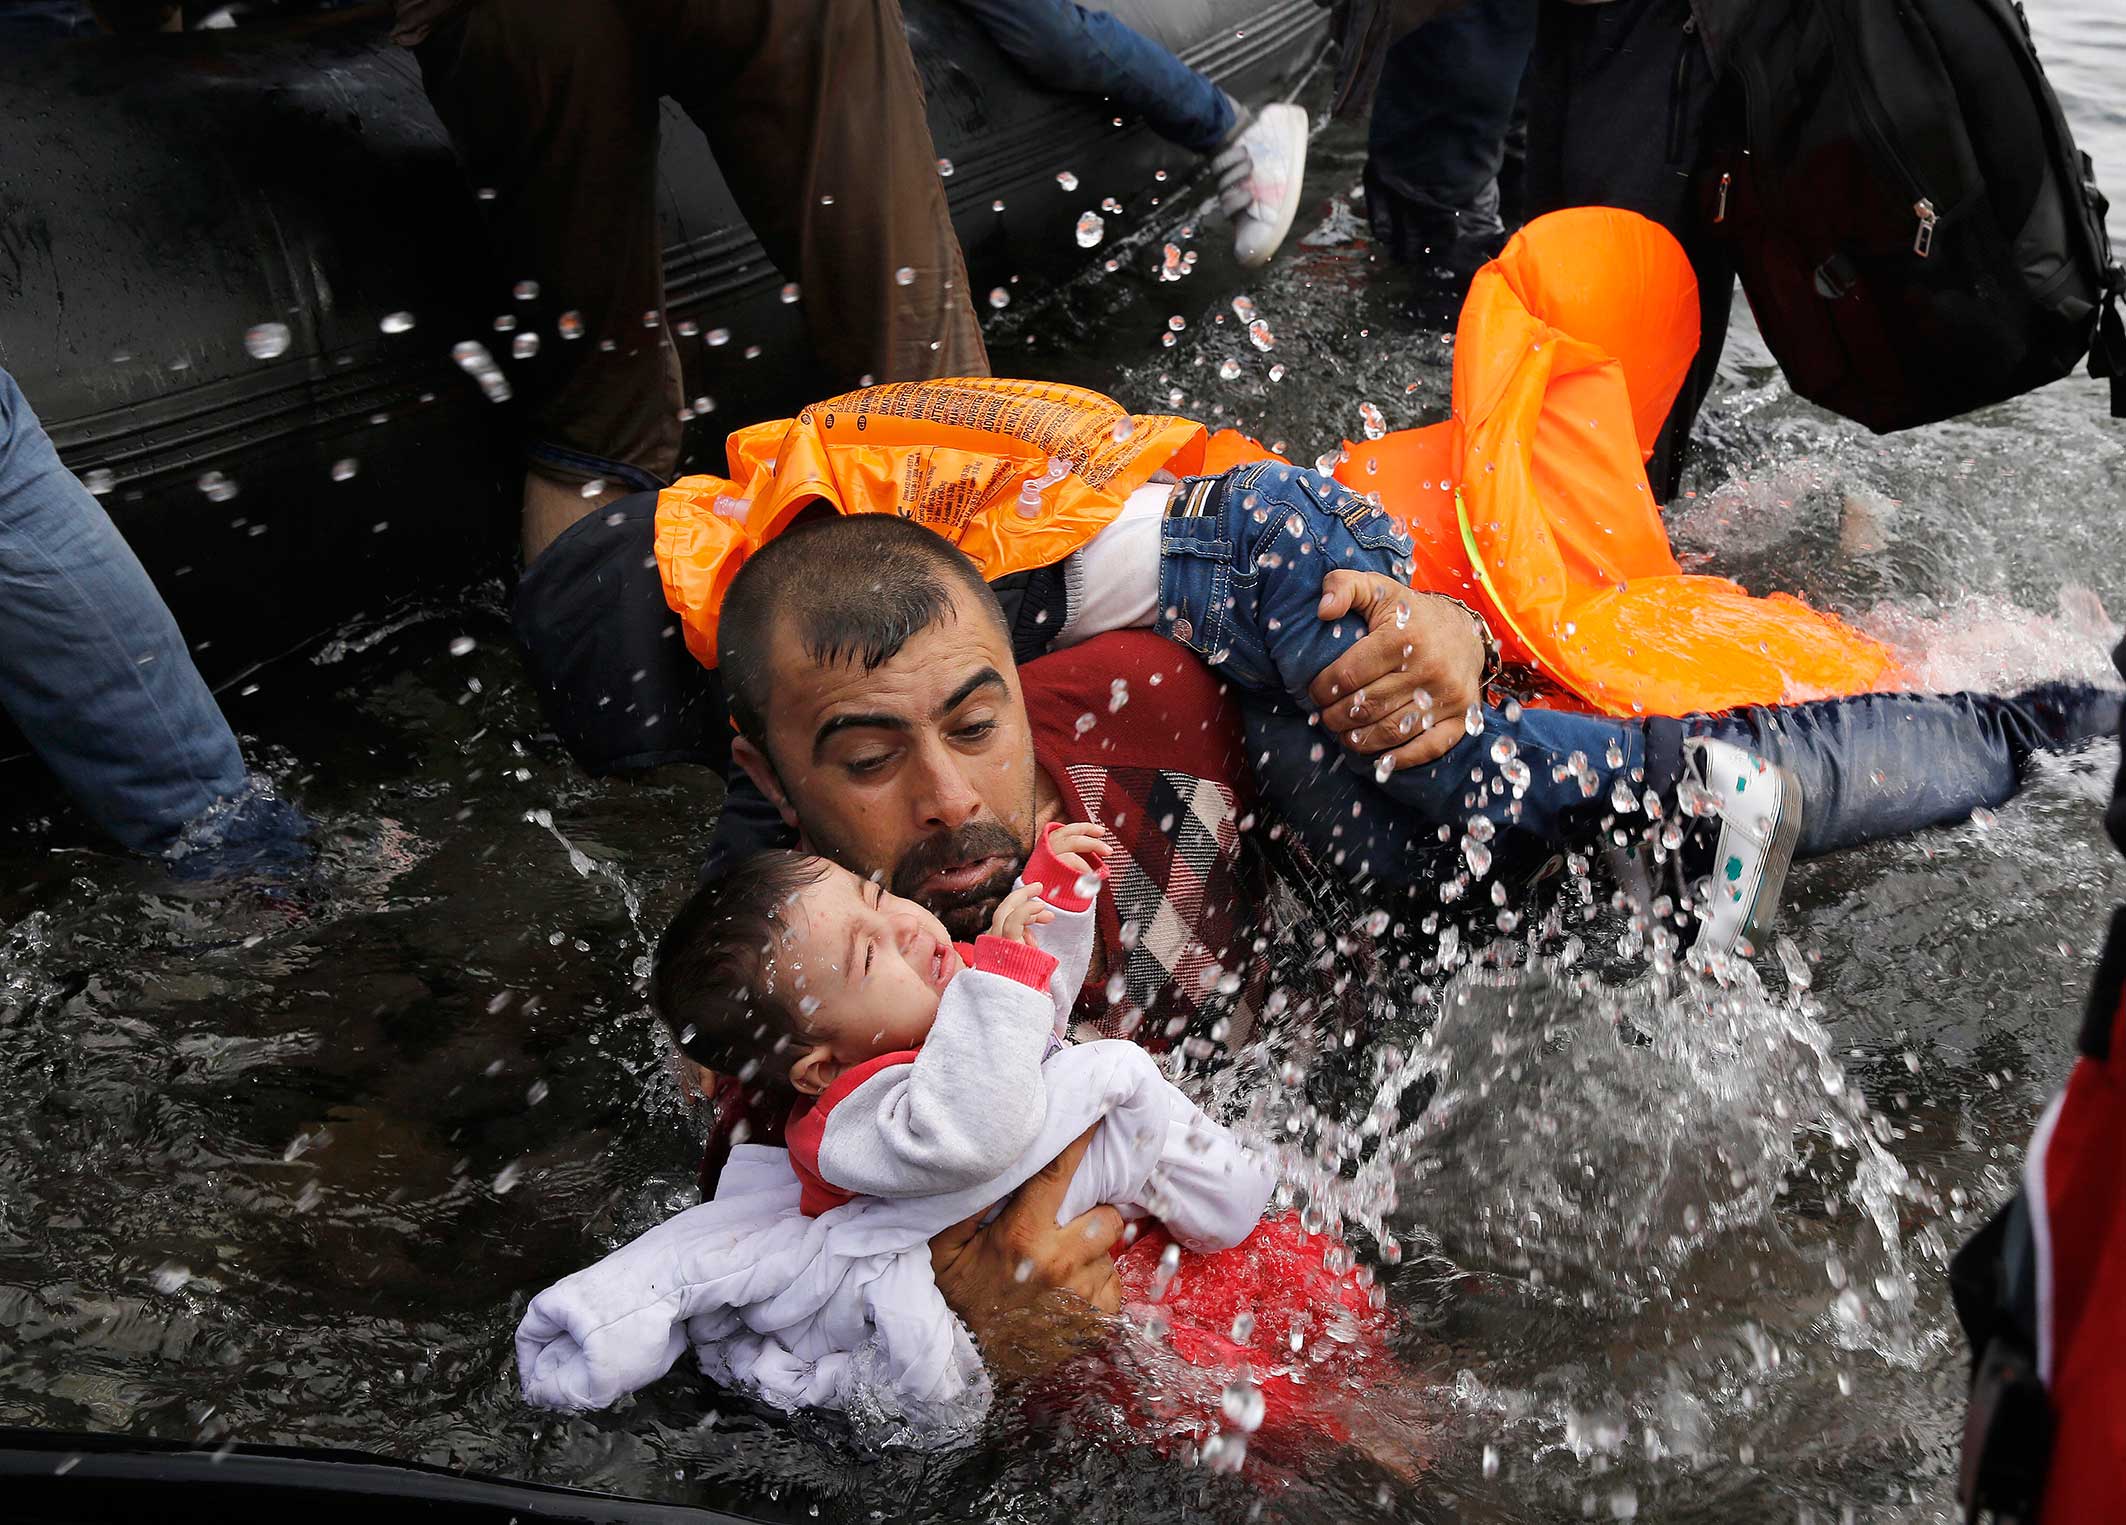 A Syrian with his two children struggling to disembark after crossing from Turkey. Island of Lesbos, Sept. 24, 2015. (Yannis Behrakis—Reuters)